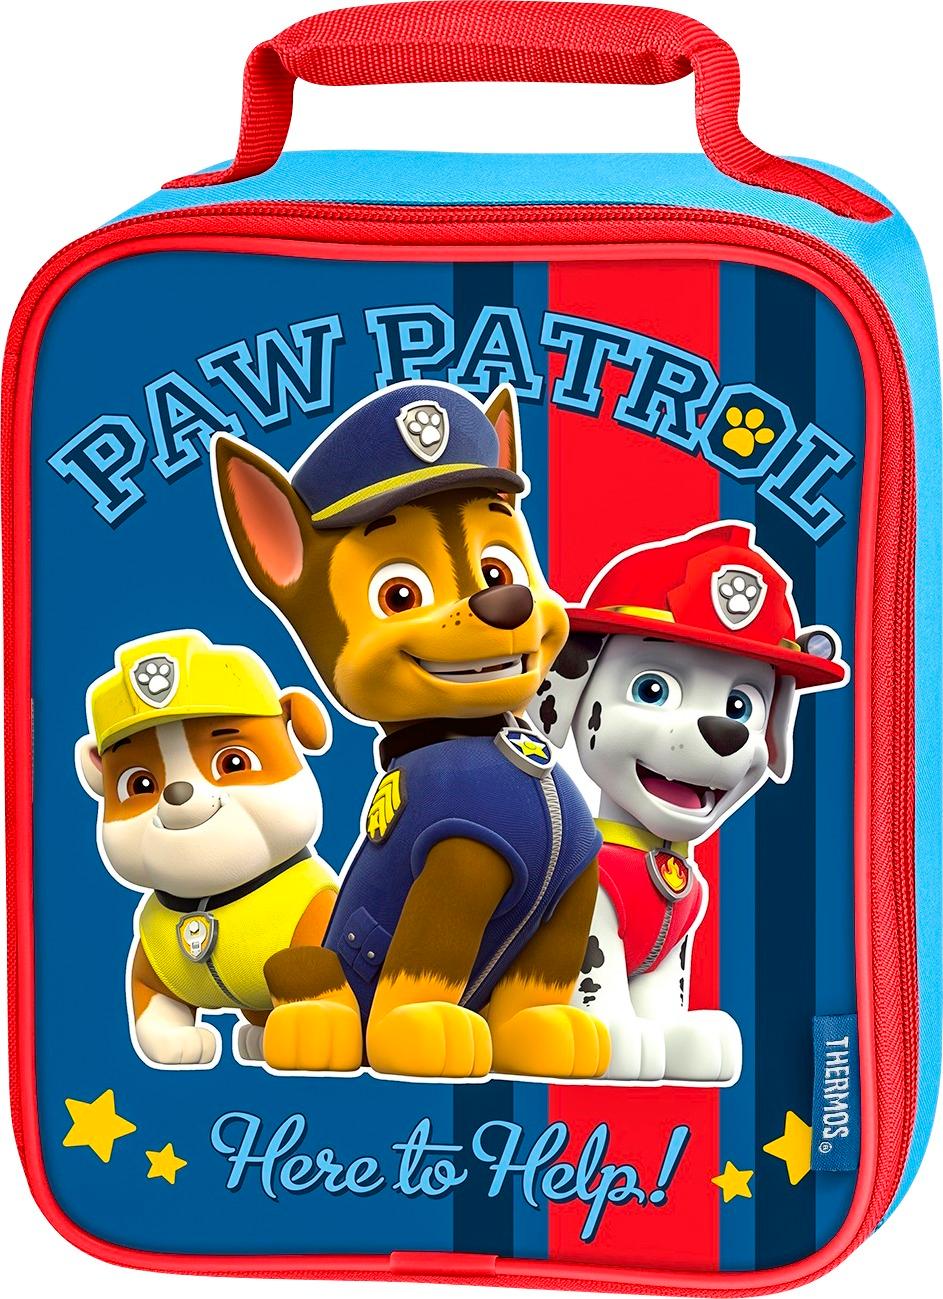 Thermos Kids' Soft Lunch Kit/Insulated Lunch Box,PAW PATROL GIRL